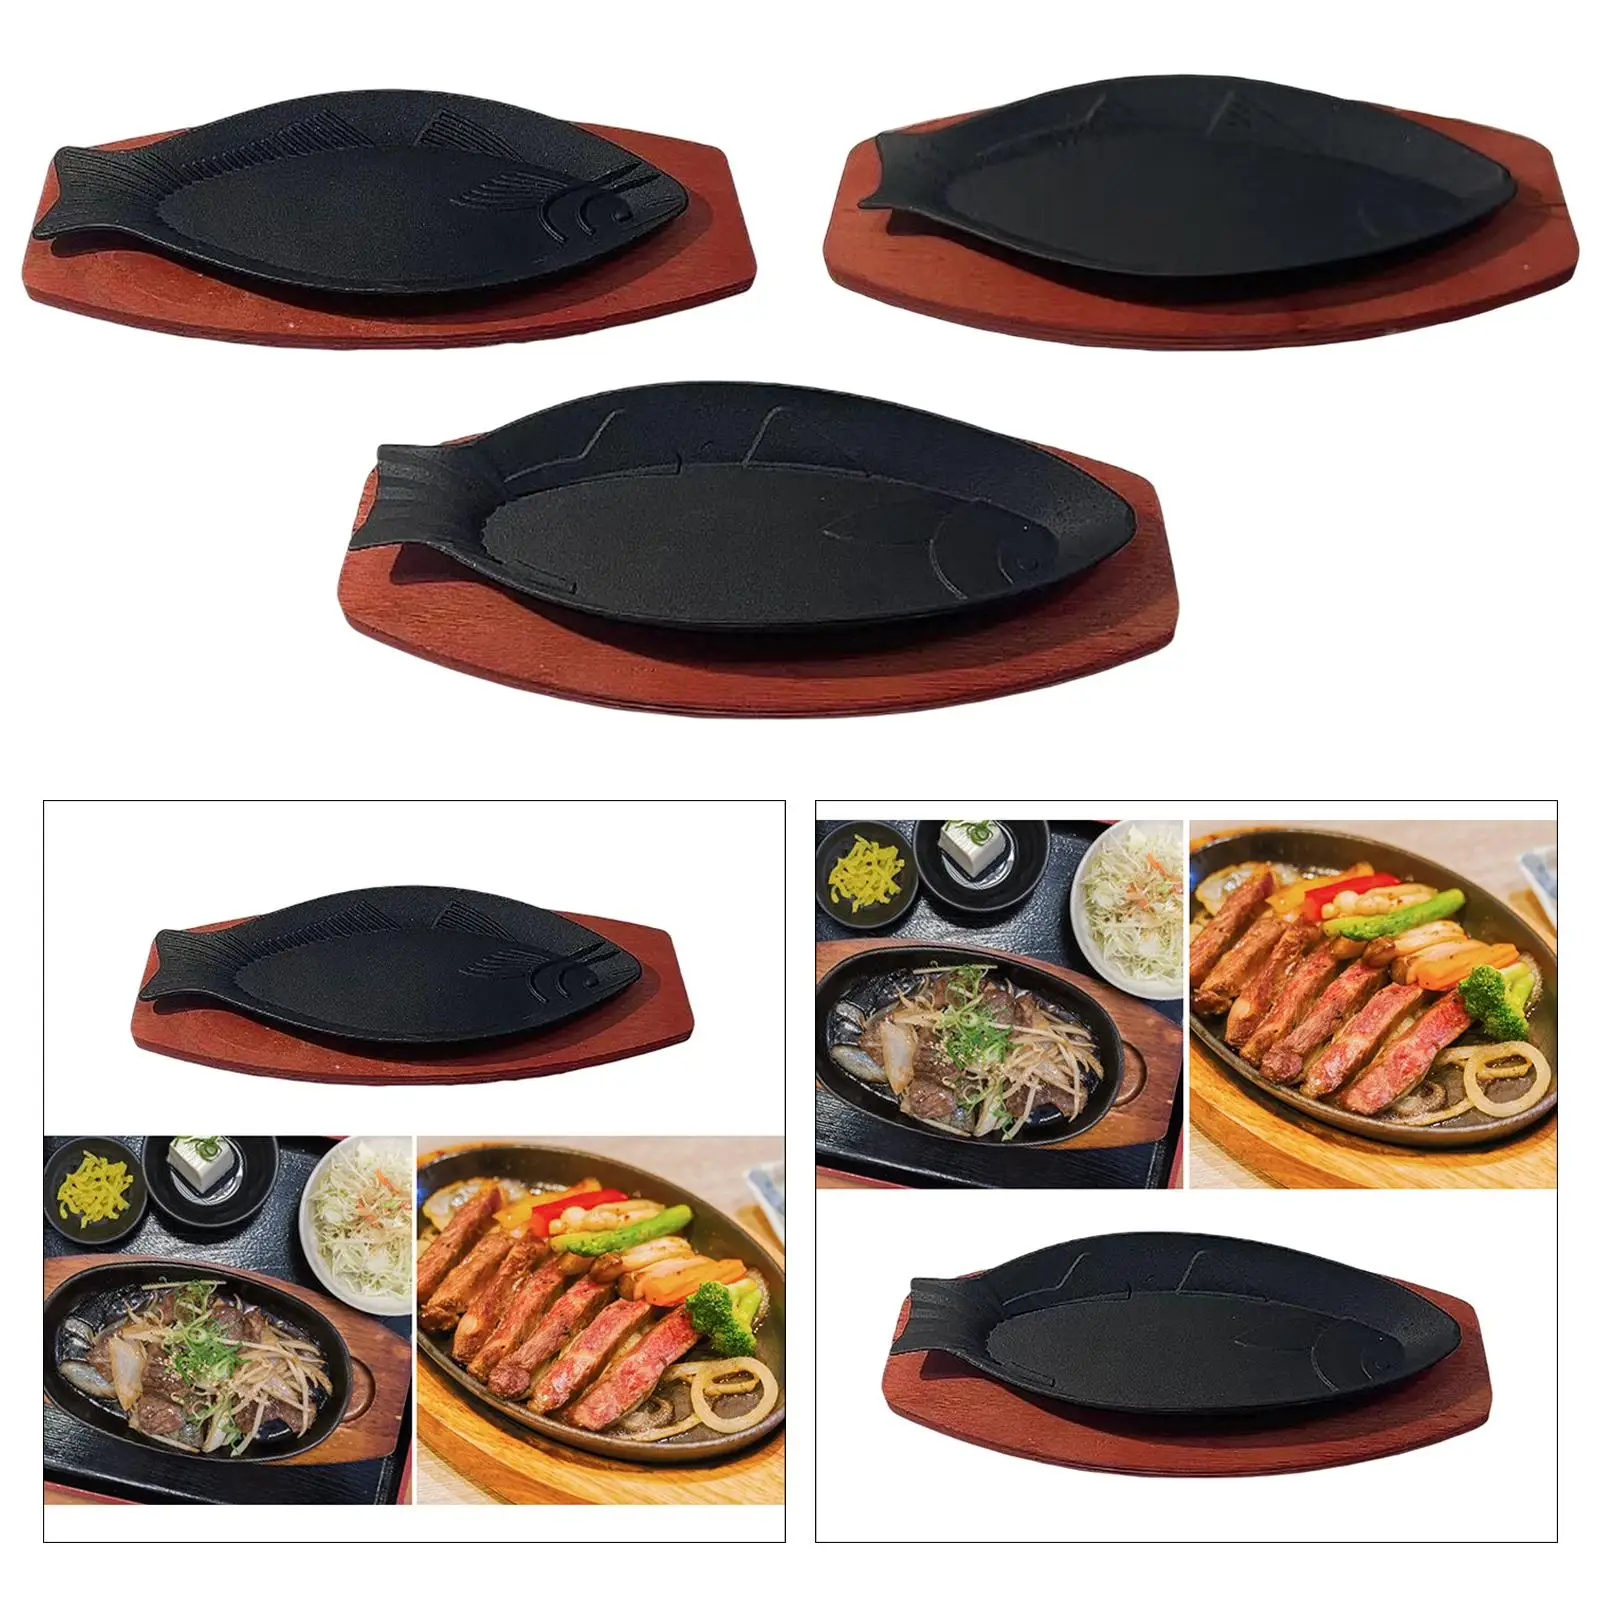 Portable Grilling Pan Serving Pan Fryer Grilling Griddle Plate Baking Tools Steak Plate for outdoor Gatherings Camping